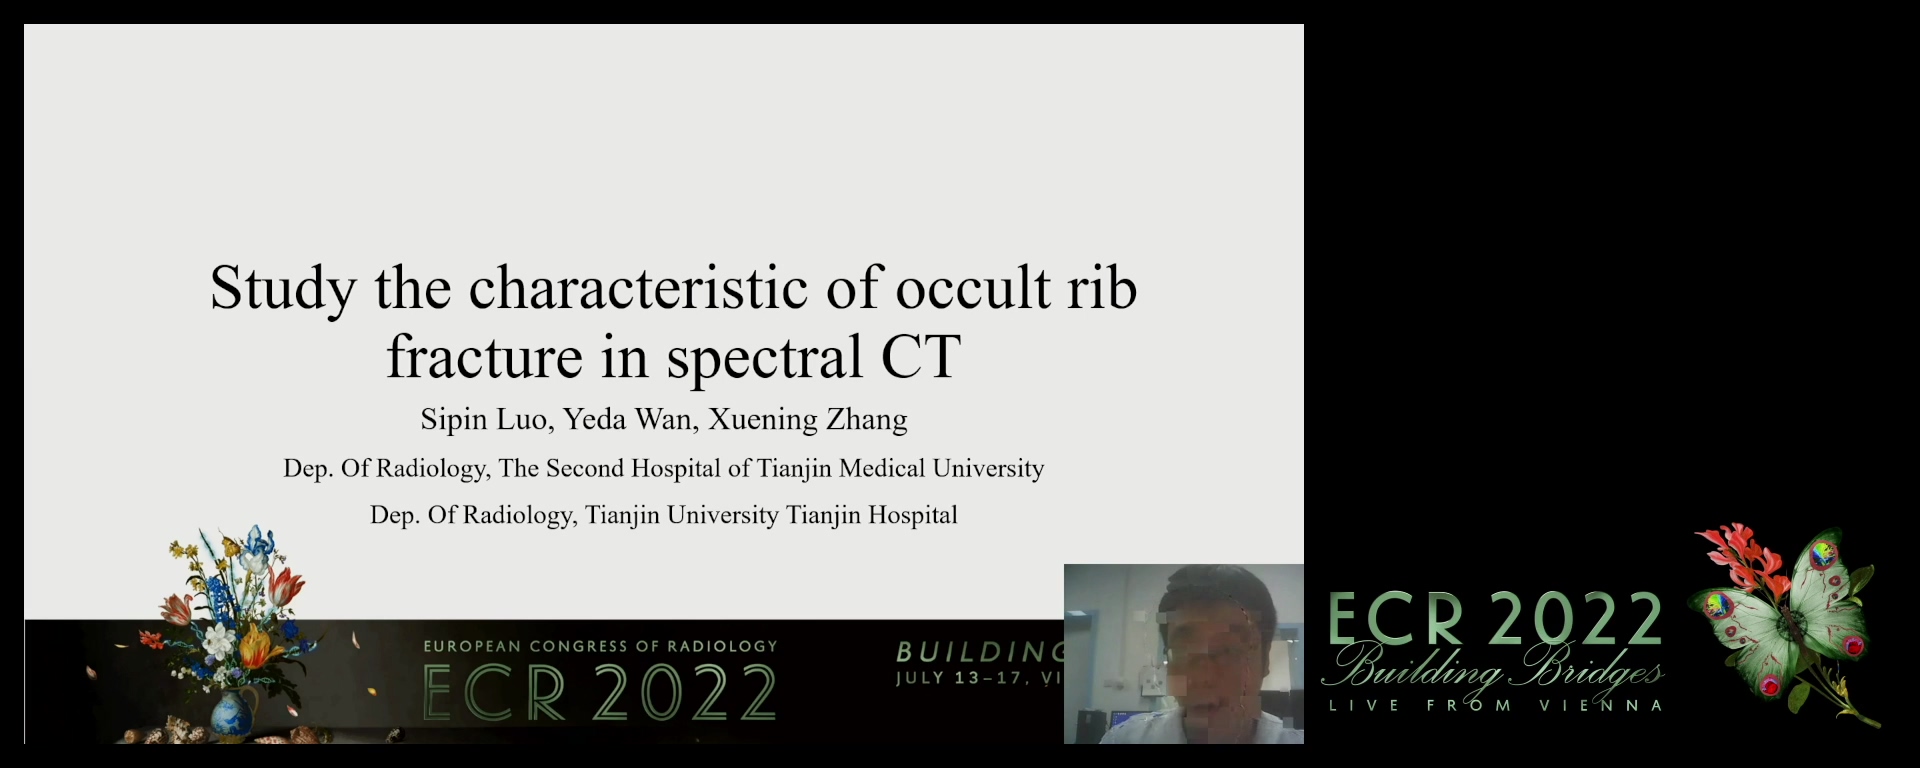 Study the characteristic of occult rib fracture in spectral CT